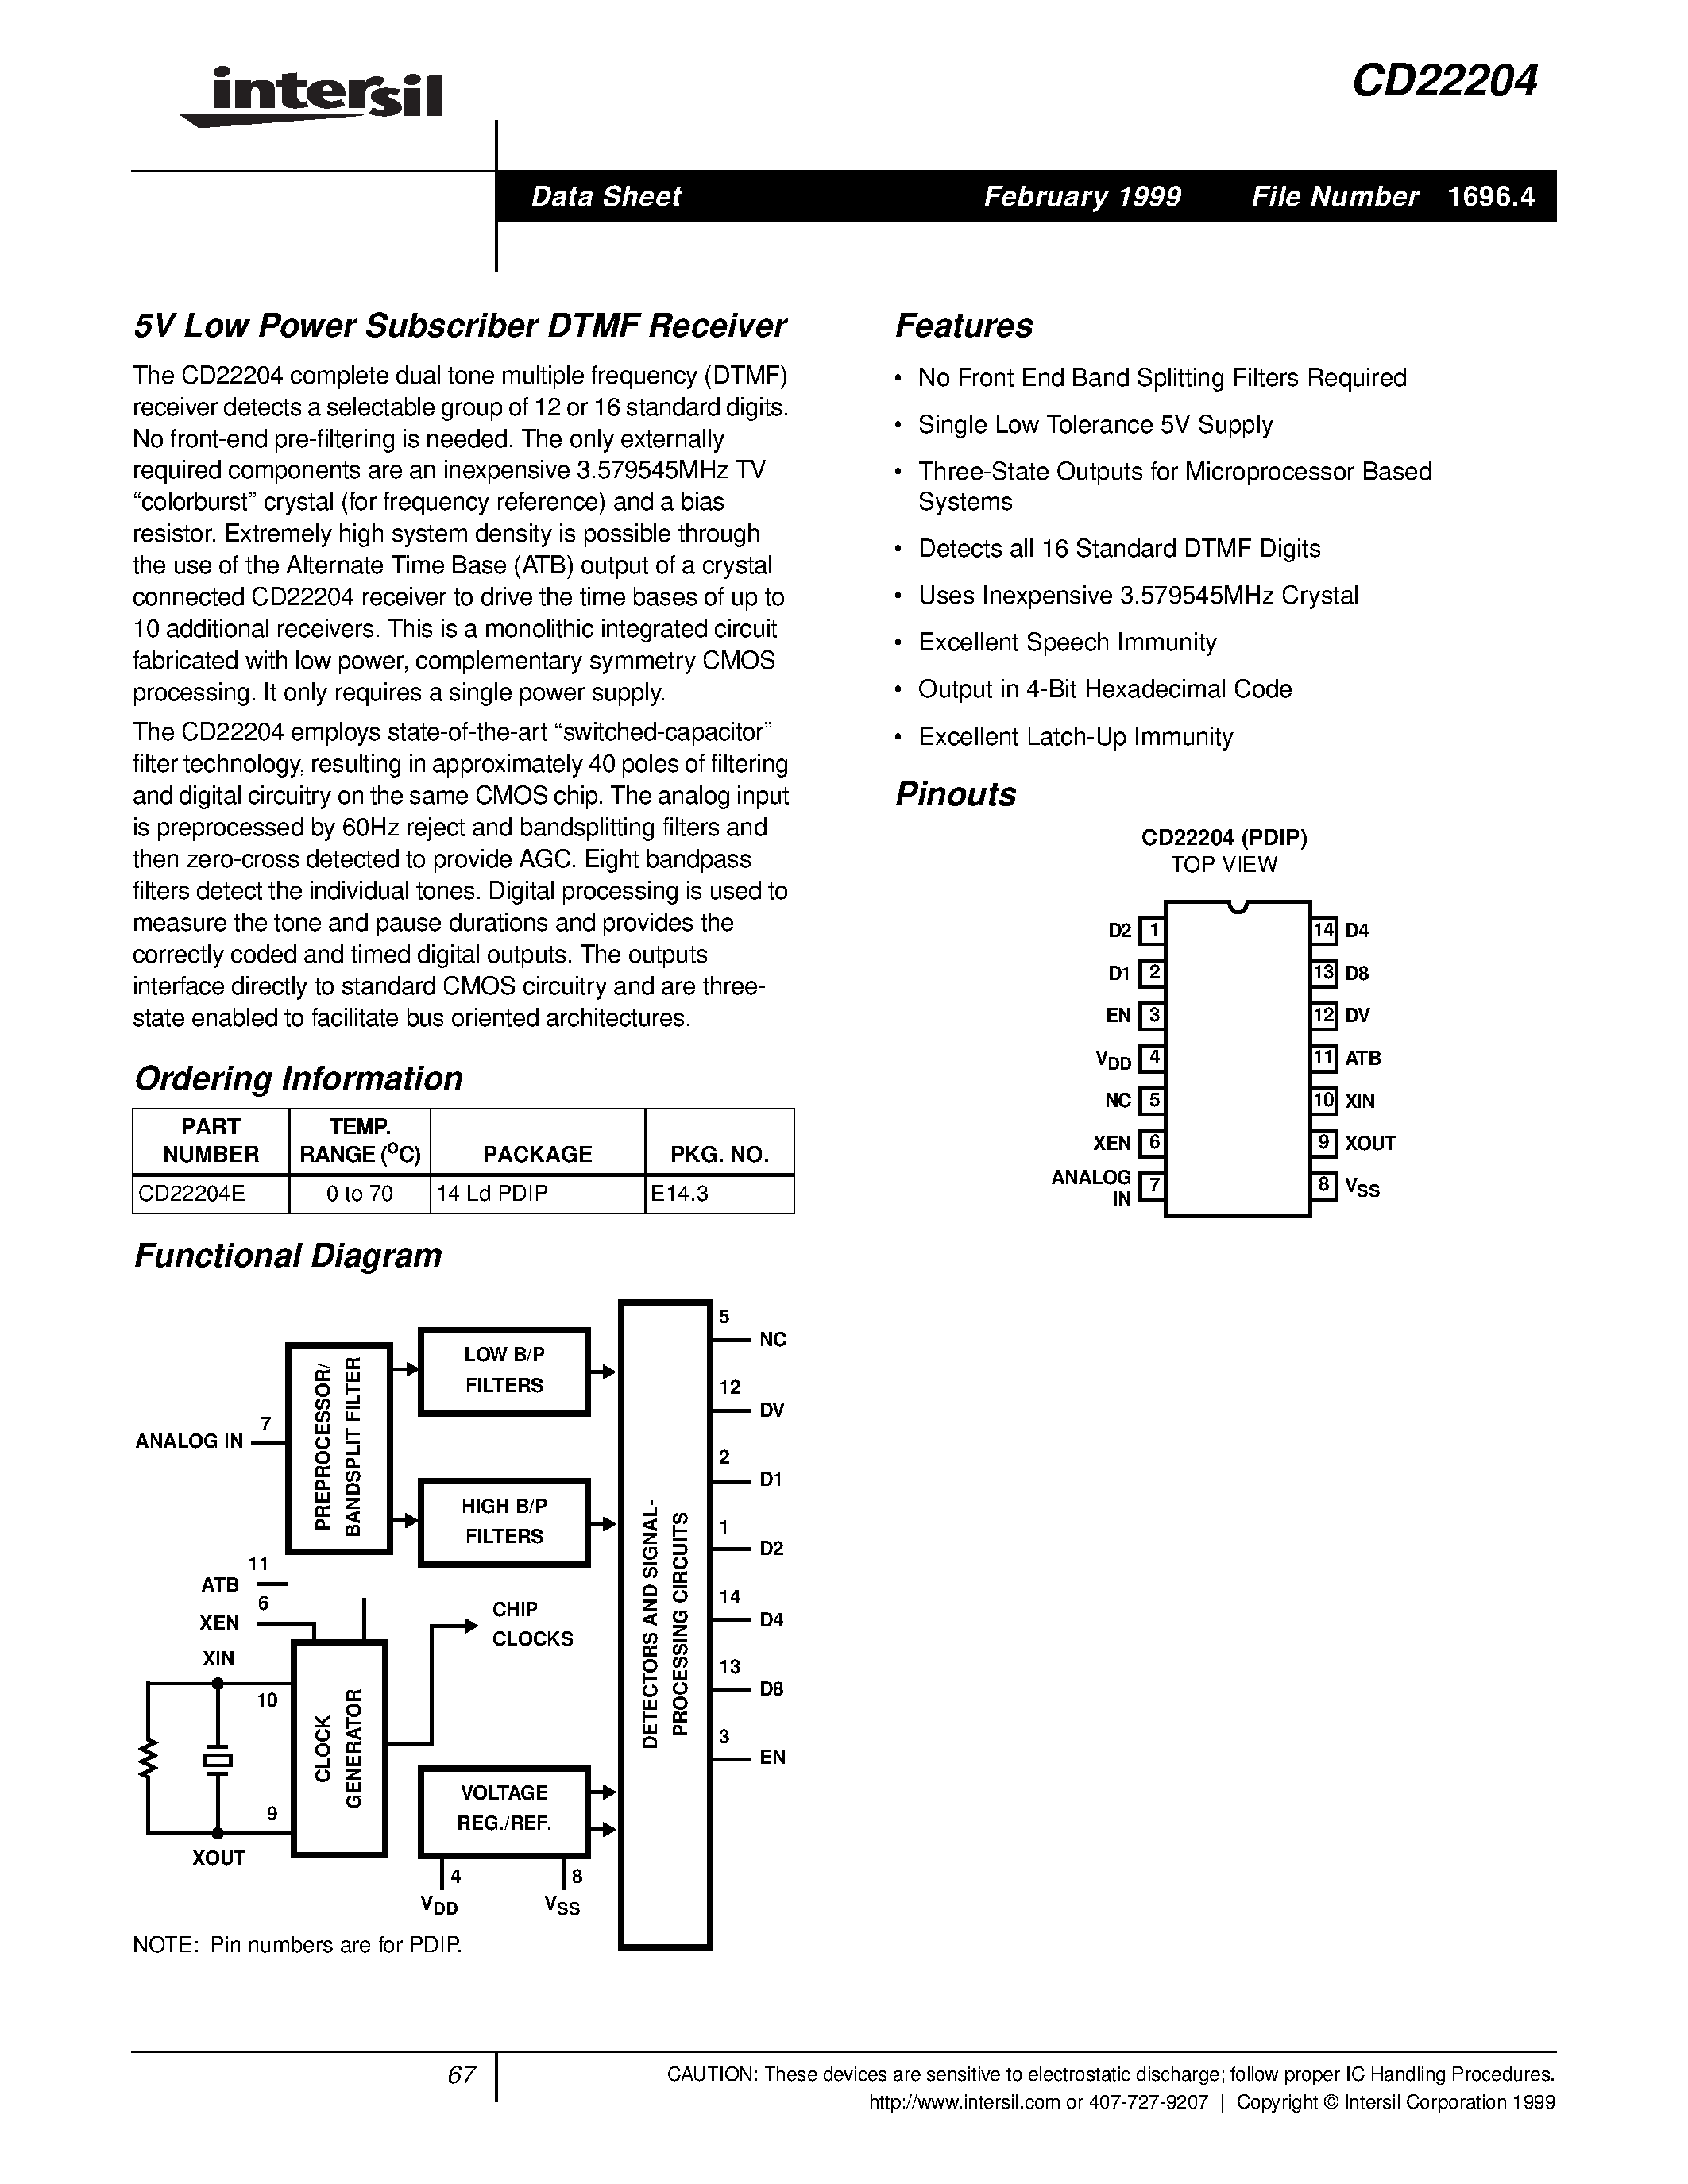 Datasheet CD22204E - 5V Low Power Subscriber DTMF Receiver page 1